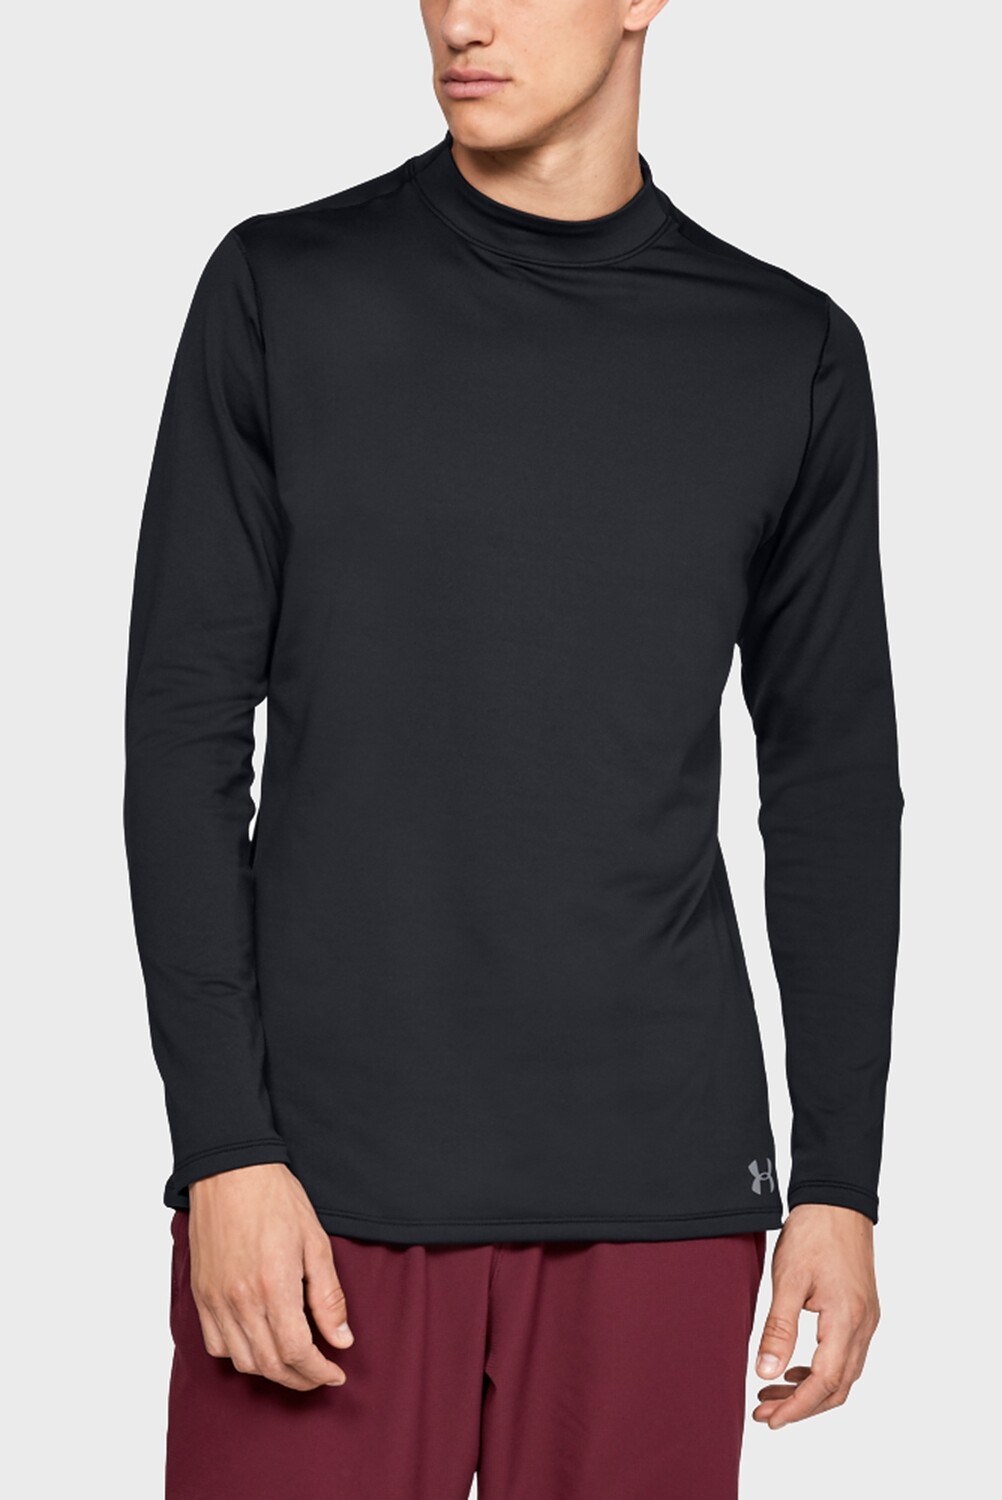 Рашгард ColdGear Fitted "Mock", Black, Under Armour